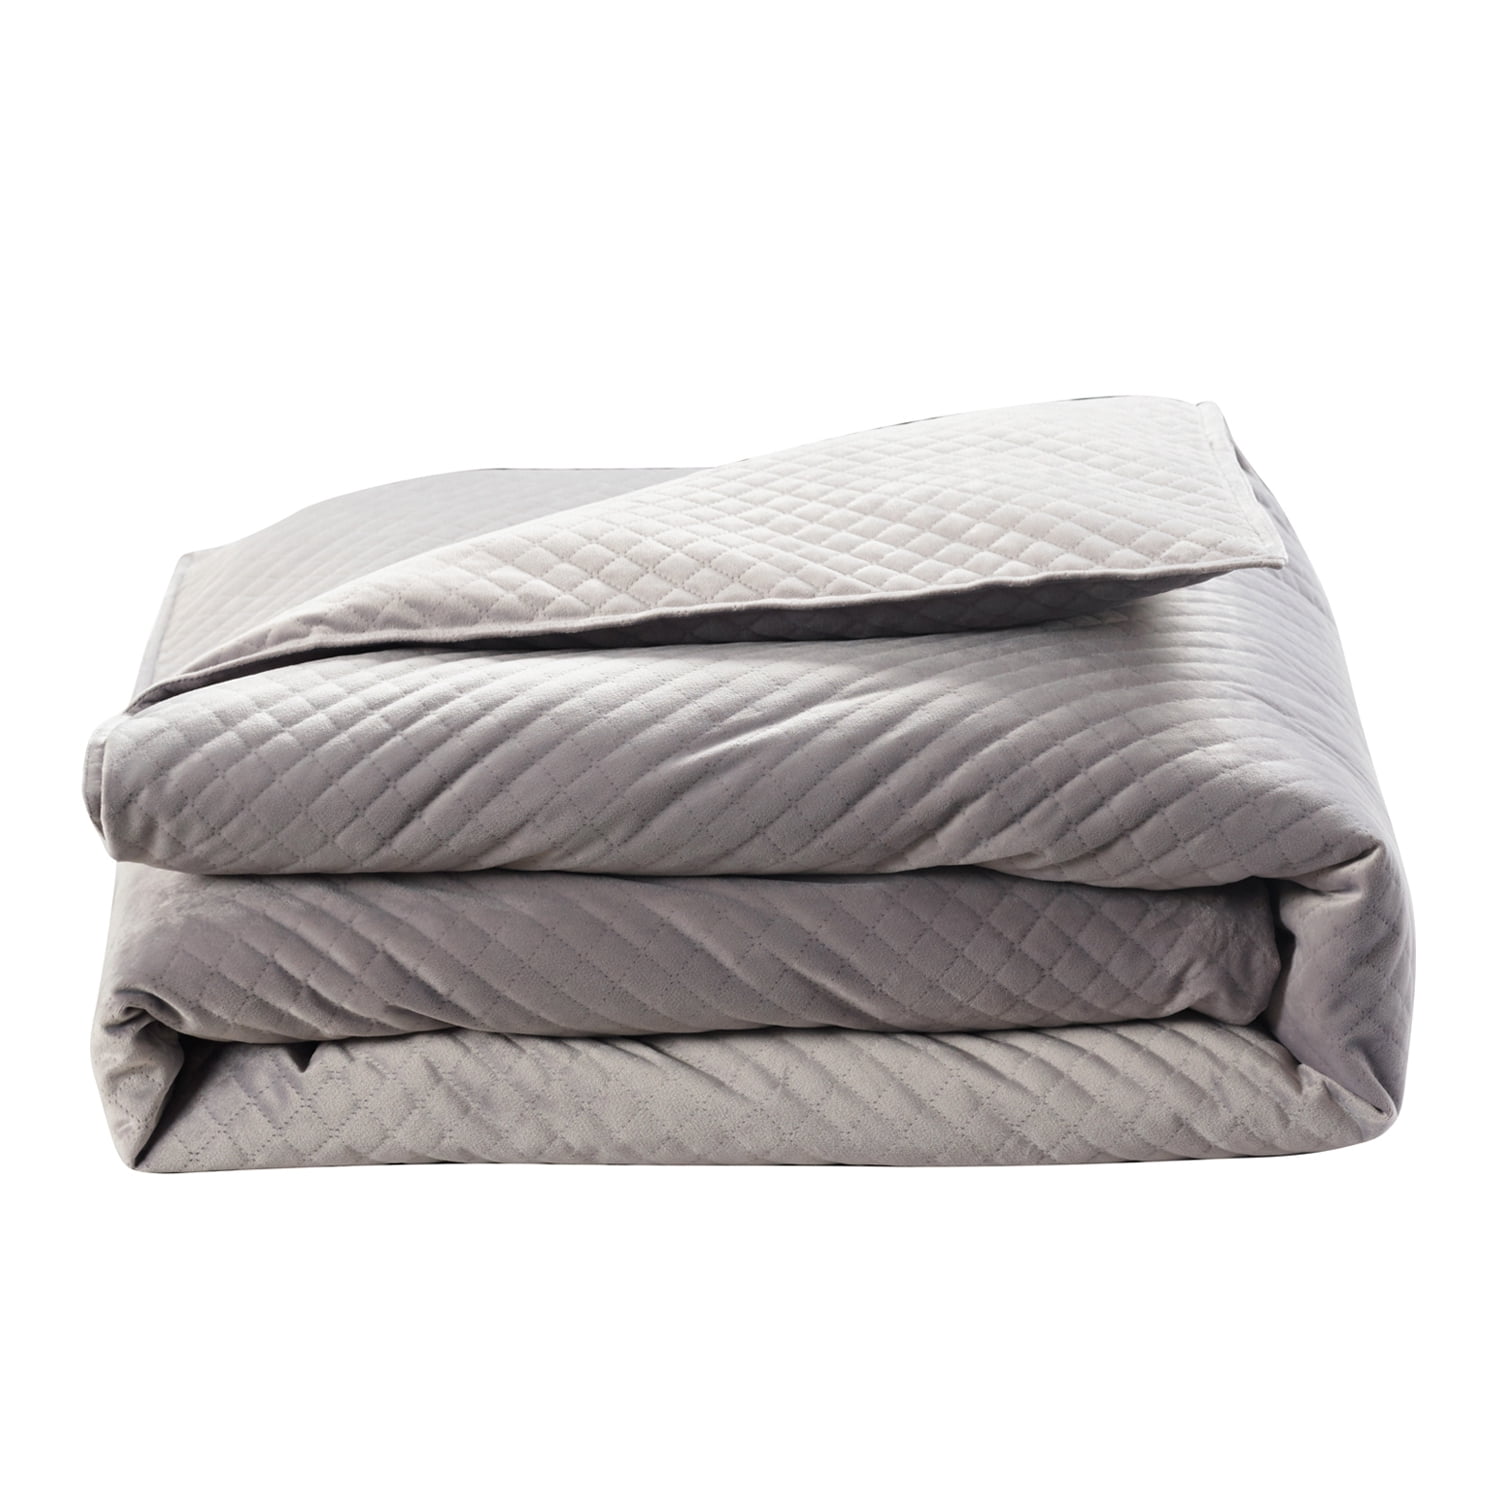 BlanQuil Quilted Weighted Blanket - Walmart.com